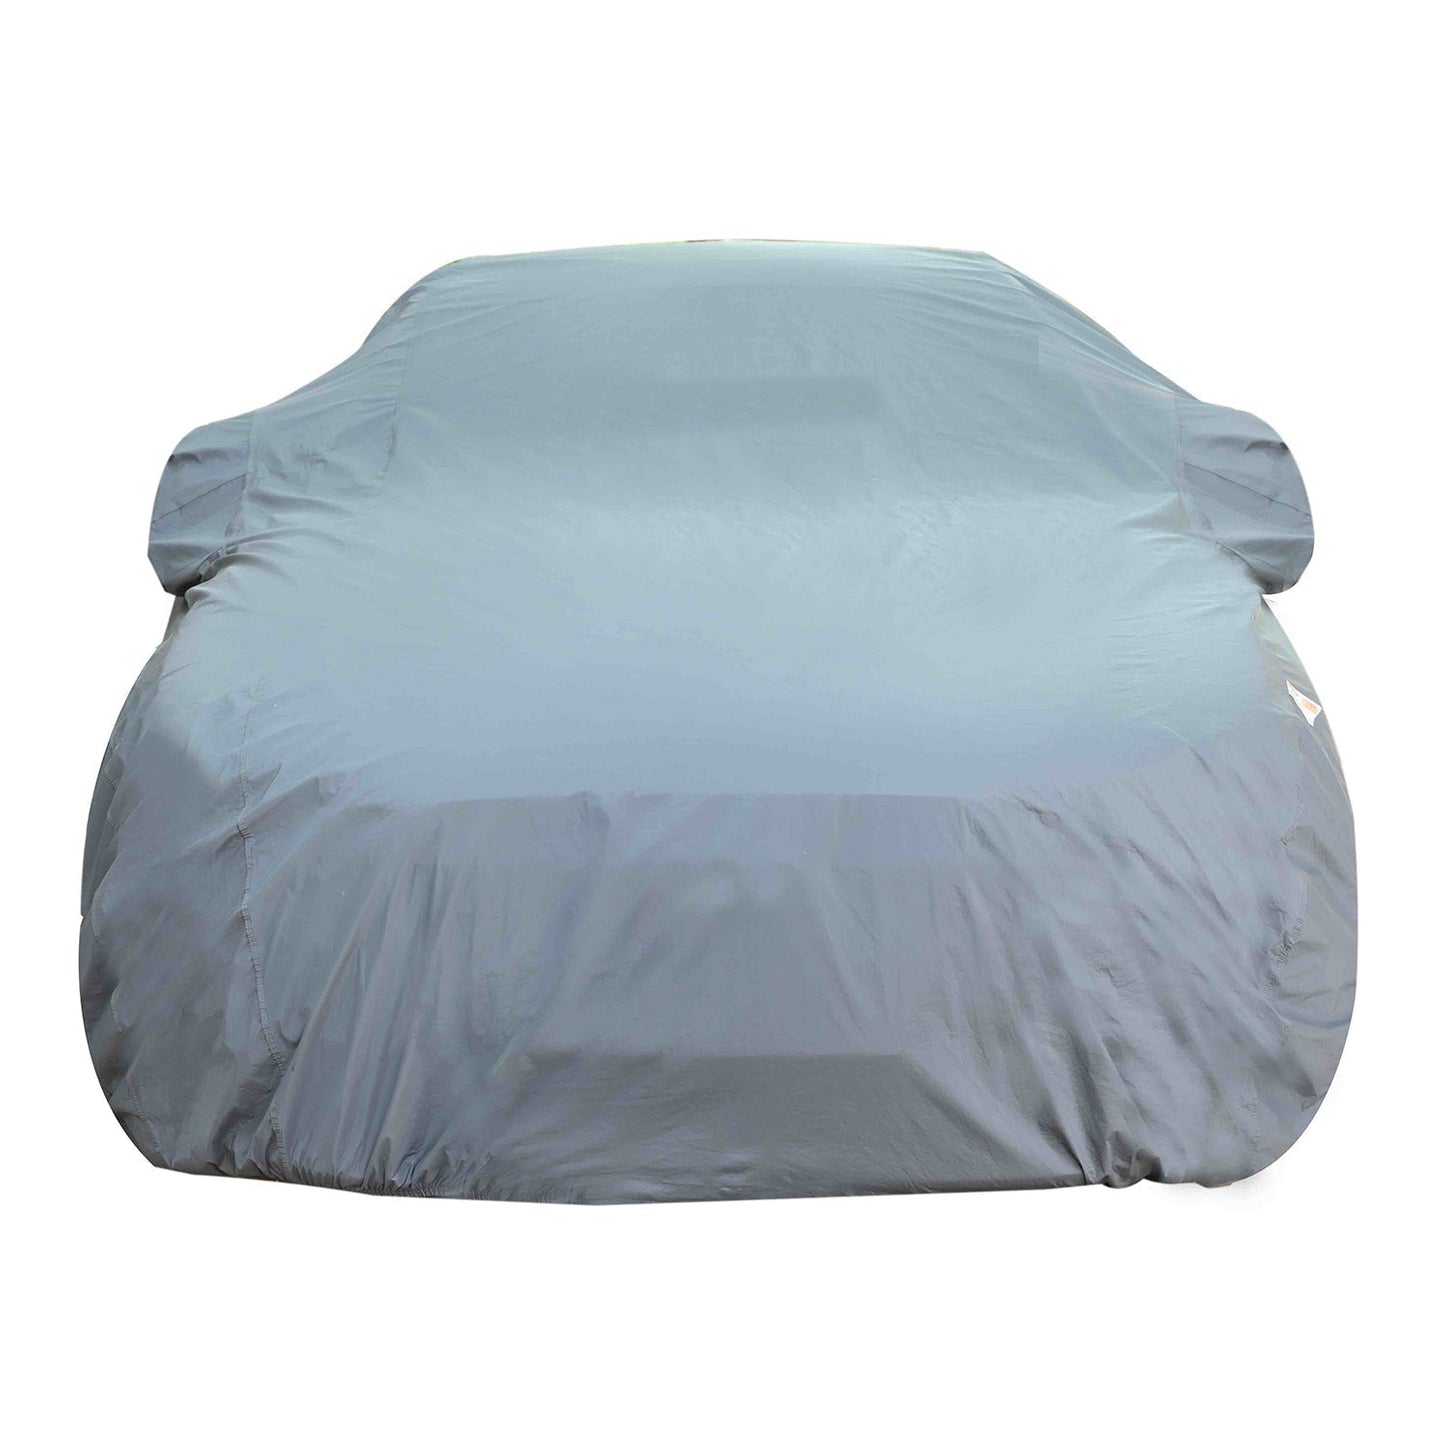 Oshotto Dark Grey 100% Anti Reflective, dustproof and Water Proof Car Body Cover with Mirror Pockets For Ford Ecosports